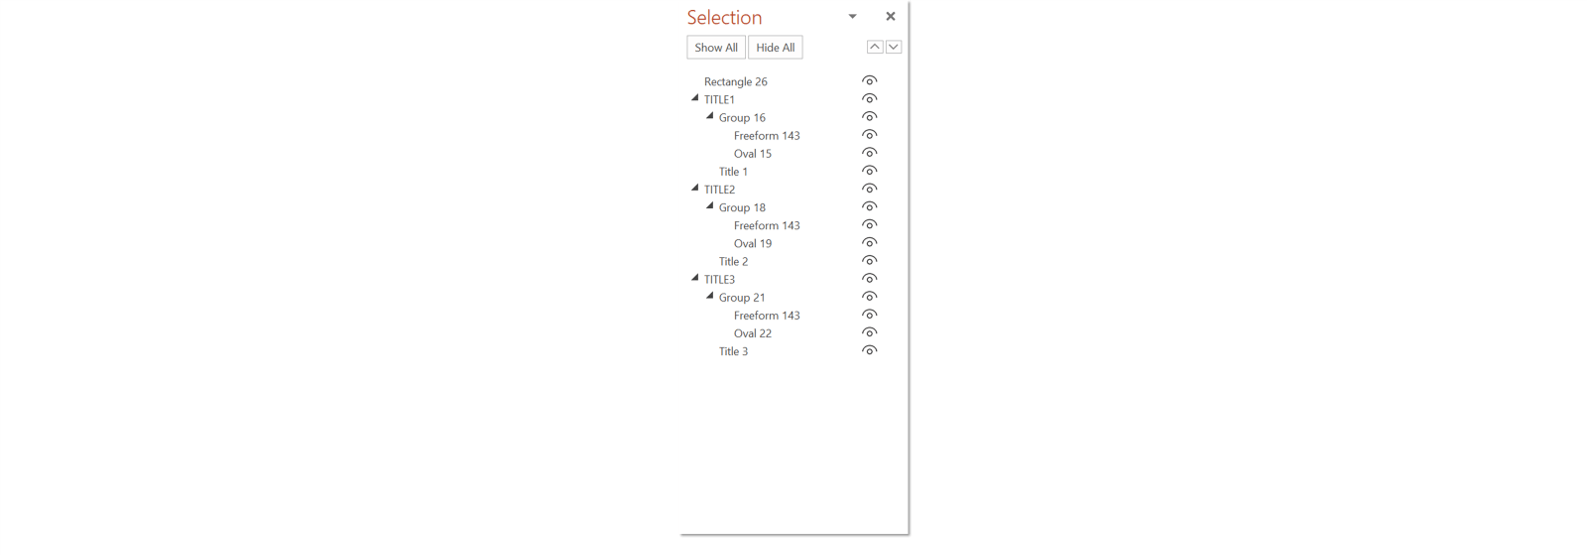 Screenshot of the Selection Pane in PowerPoint 